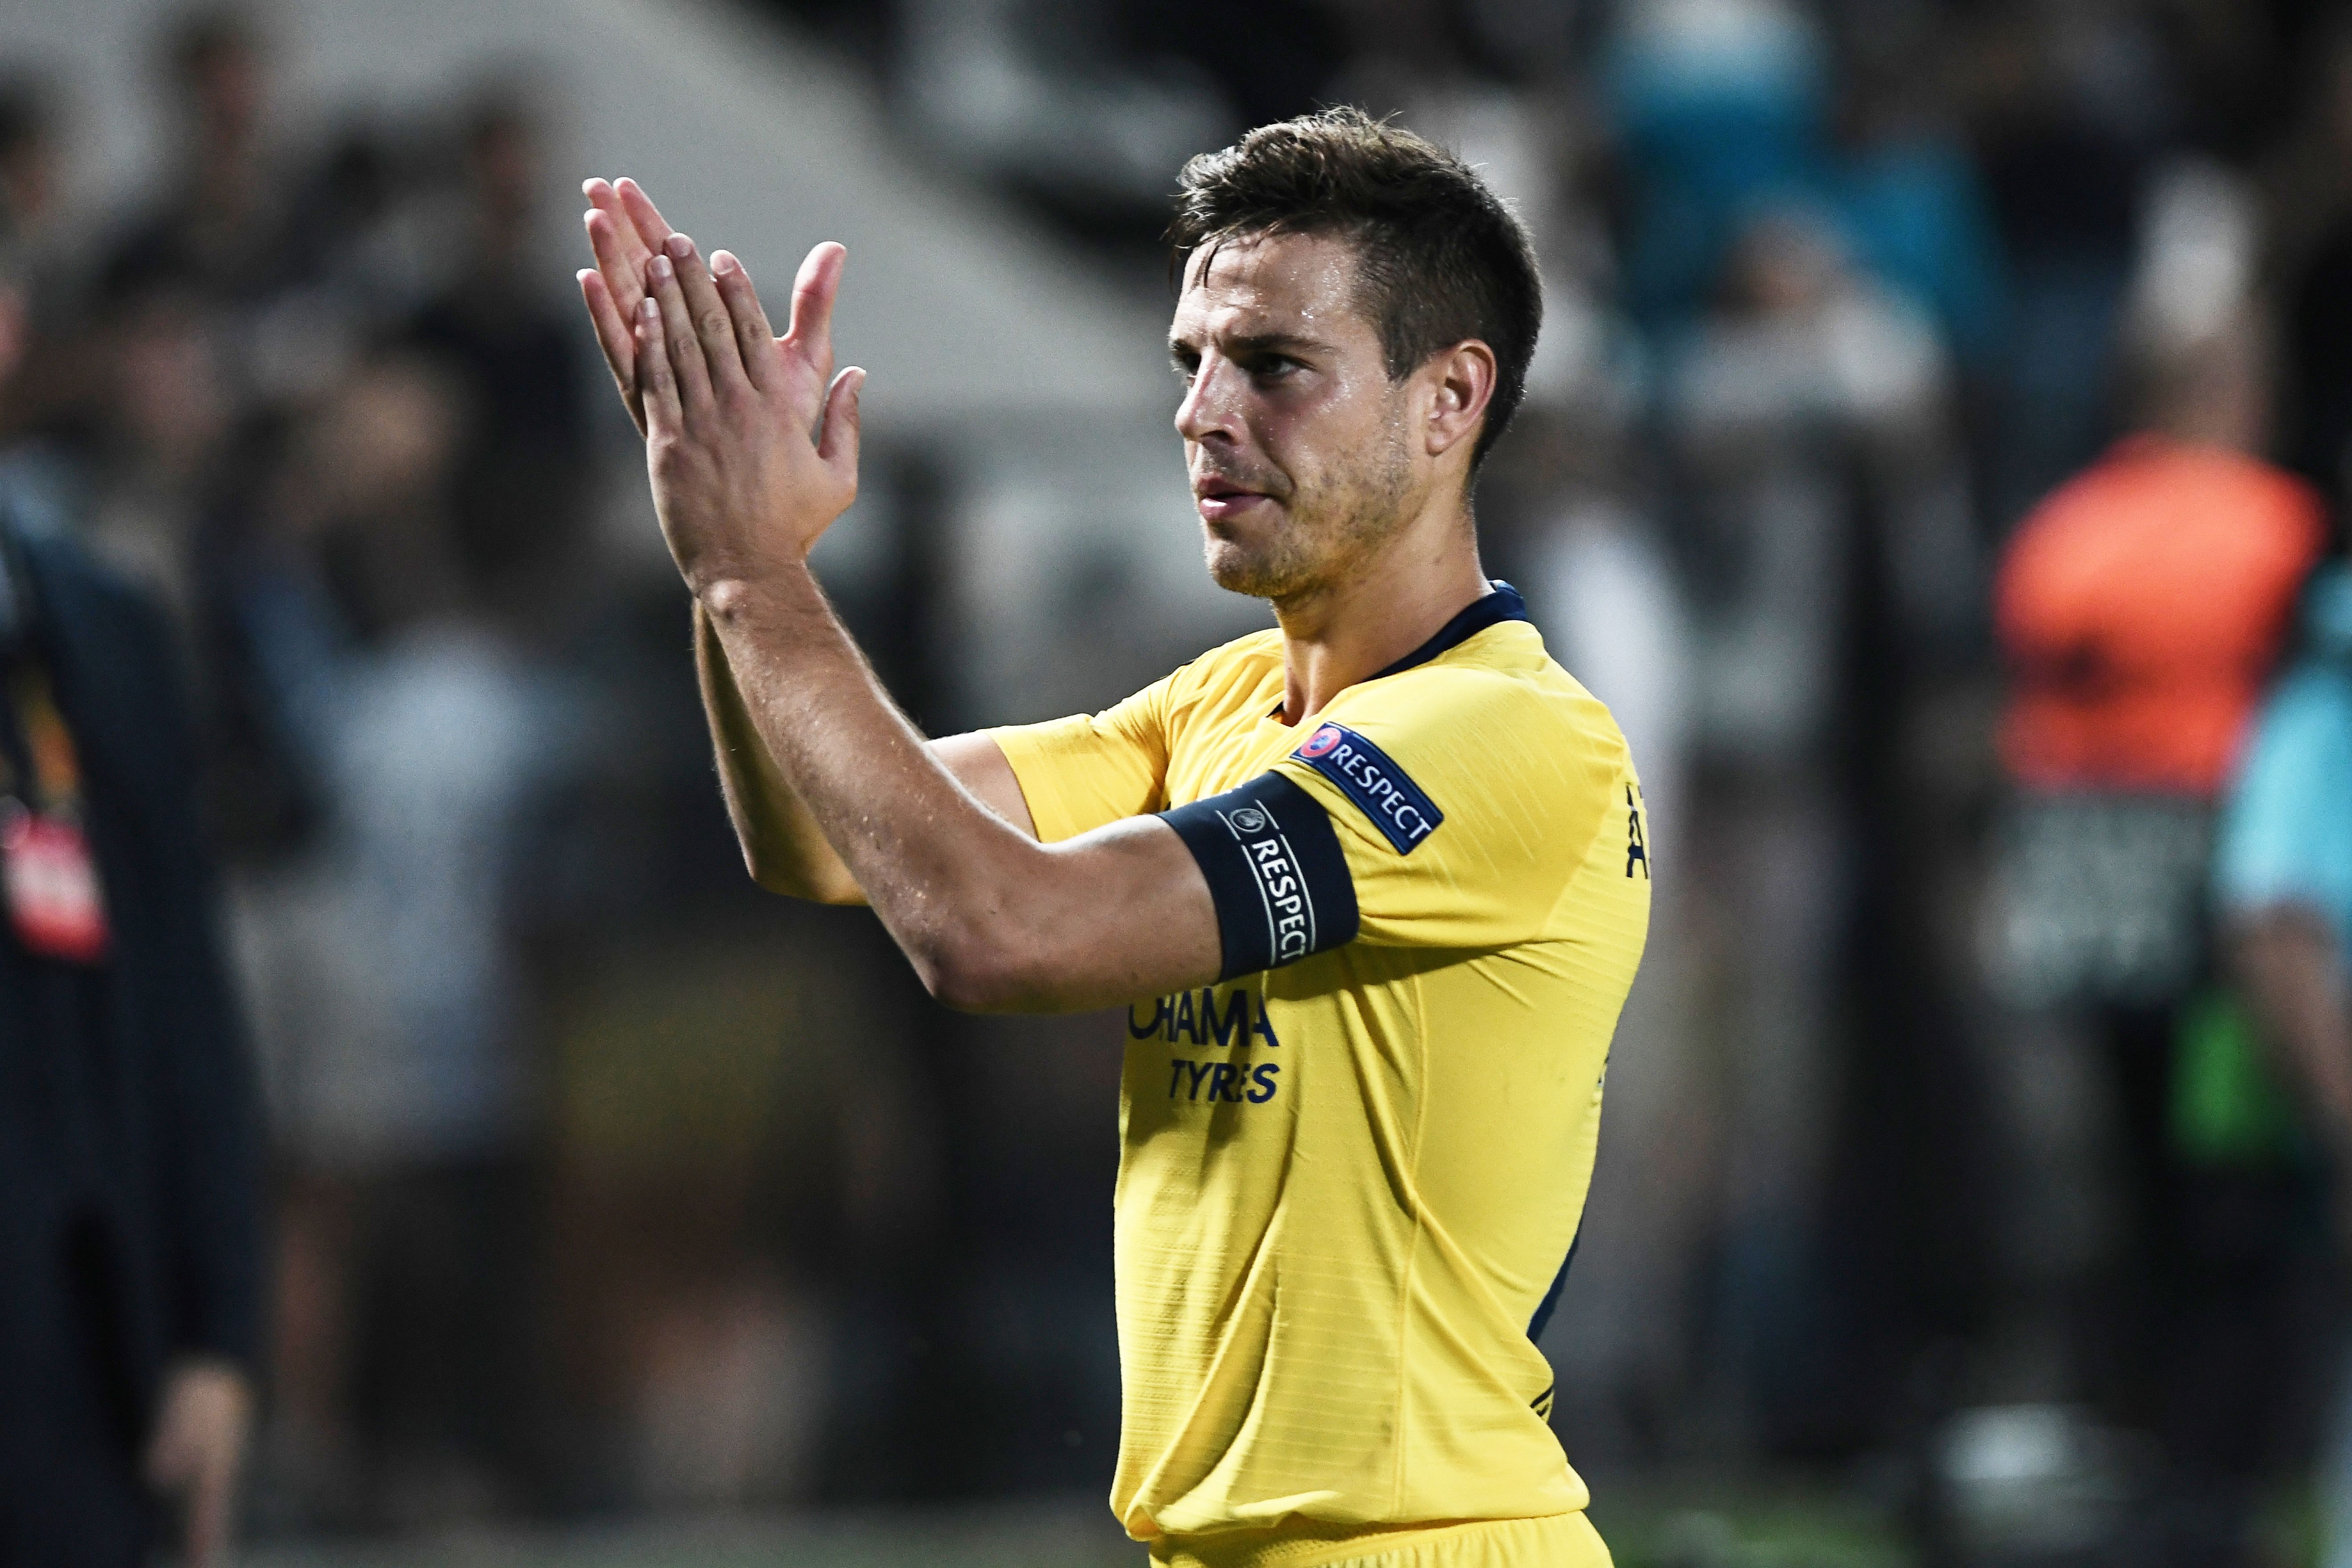 Chelsea's Spanish defender Cesar Azpilicueta celebrates after the  UEFA Europa League Group L first-leg football match between PAOK Thessaloniki and Chelsea at the Toumba stadium in Thessaloniki on September 20, 2018. (Photo by Sakis MITROLIDIS / AFP)        (Photo credit should read SAKIS MITROLIDIS/AFP/Getty Images)